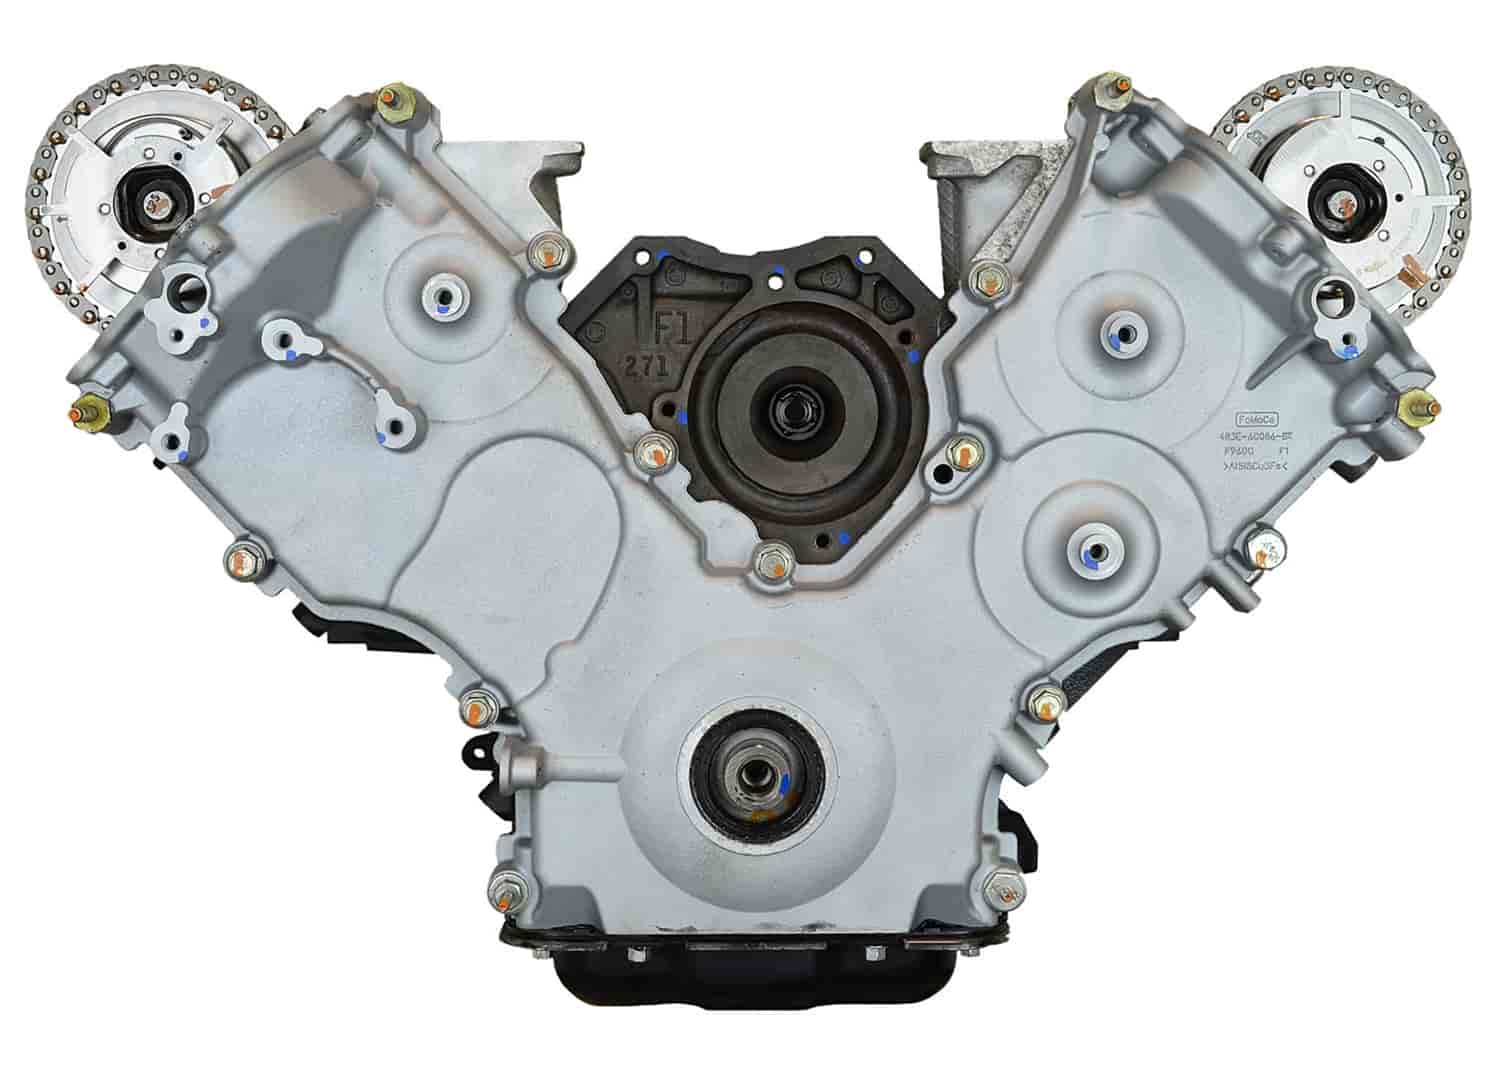 Remanufactured Crate Engine for 2006-2007 Ford Explorer & Mercury Mountaineer with 4.6L V8